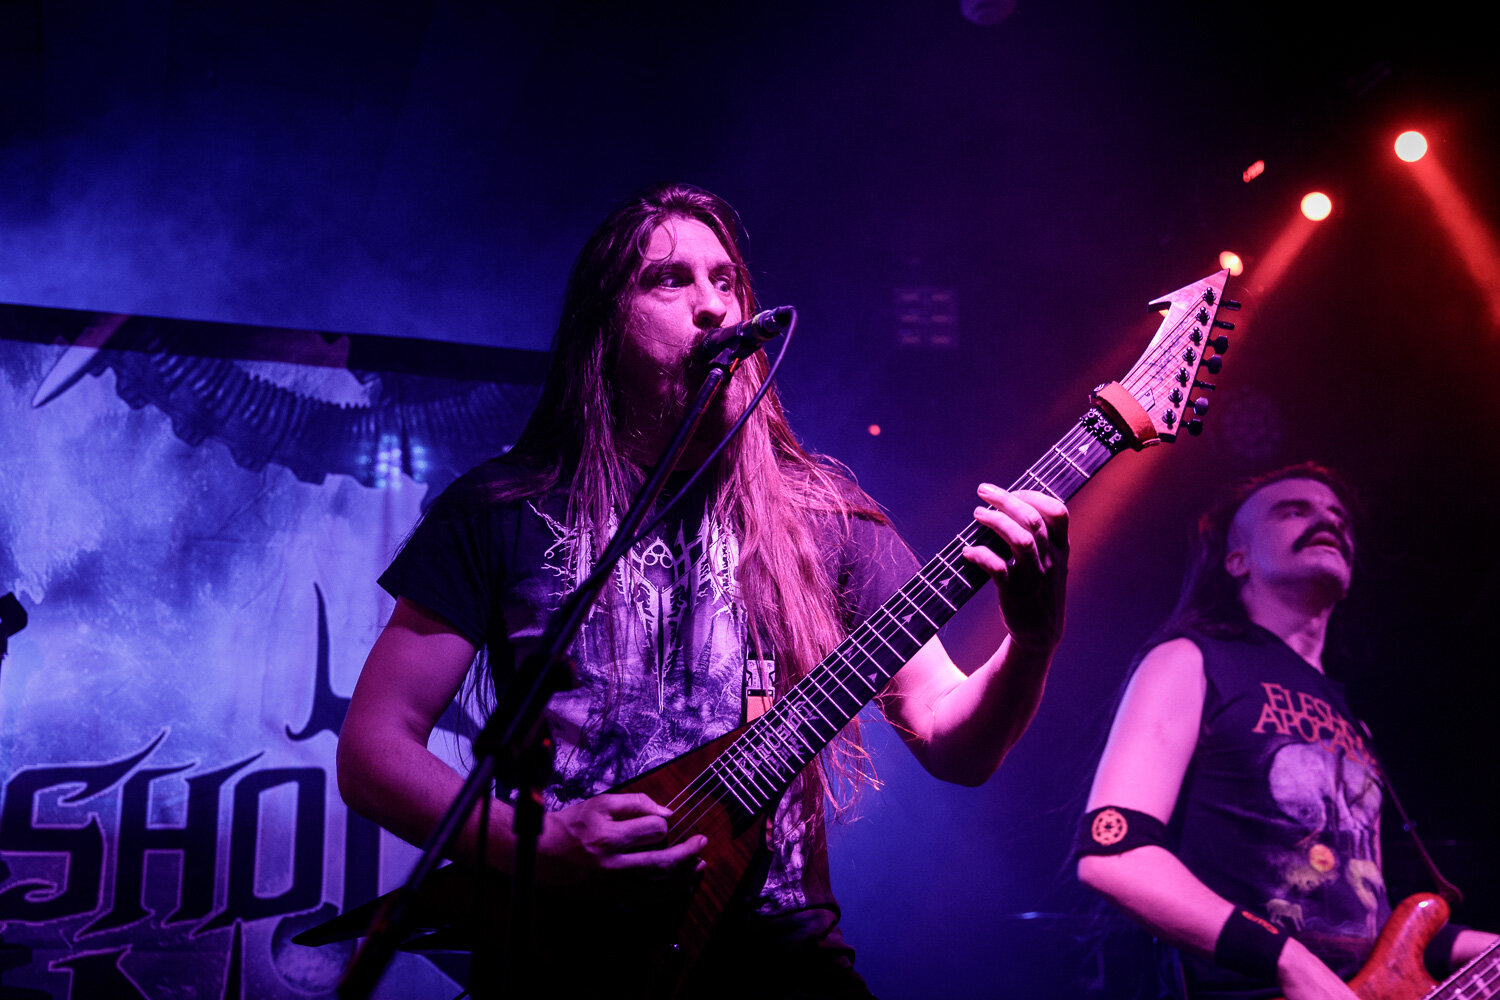 Bloodshot Dawn at Rebellion in Manchester on February 16th 2020